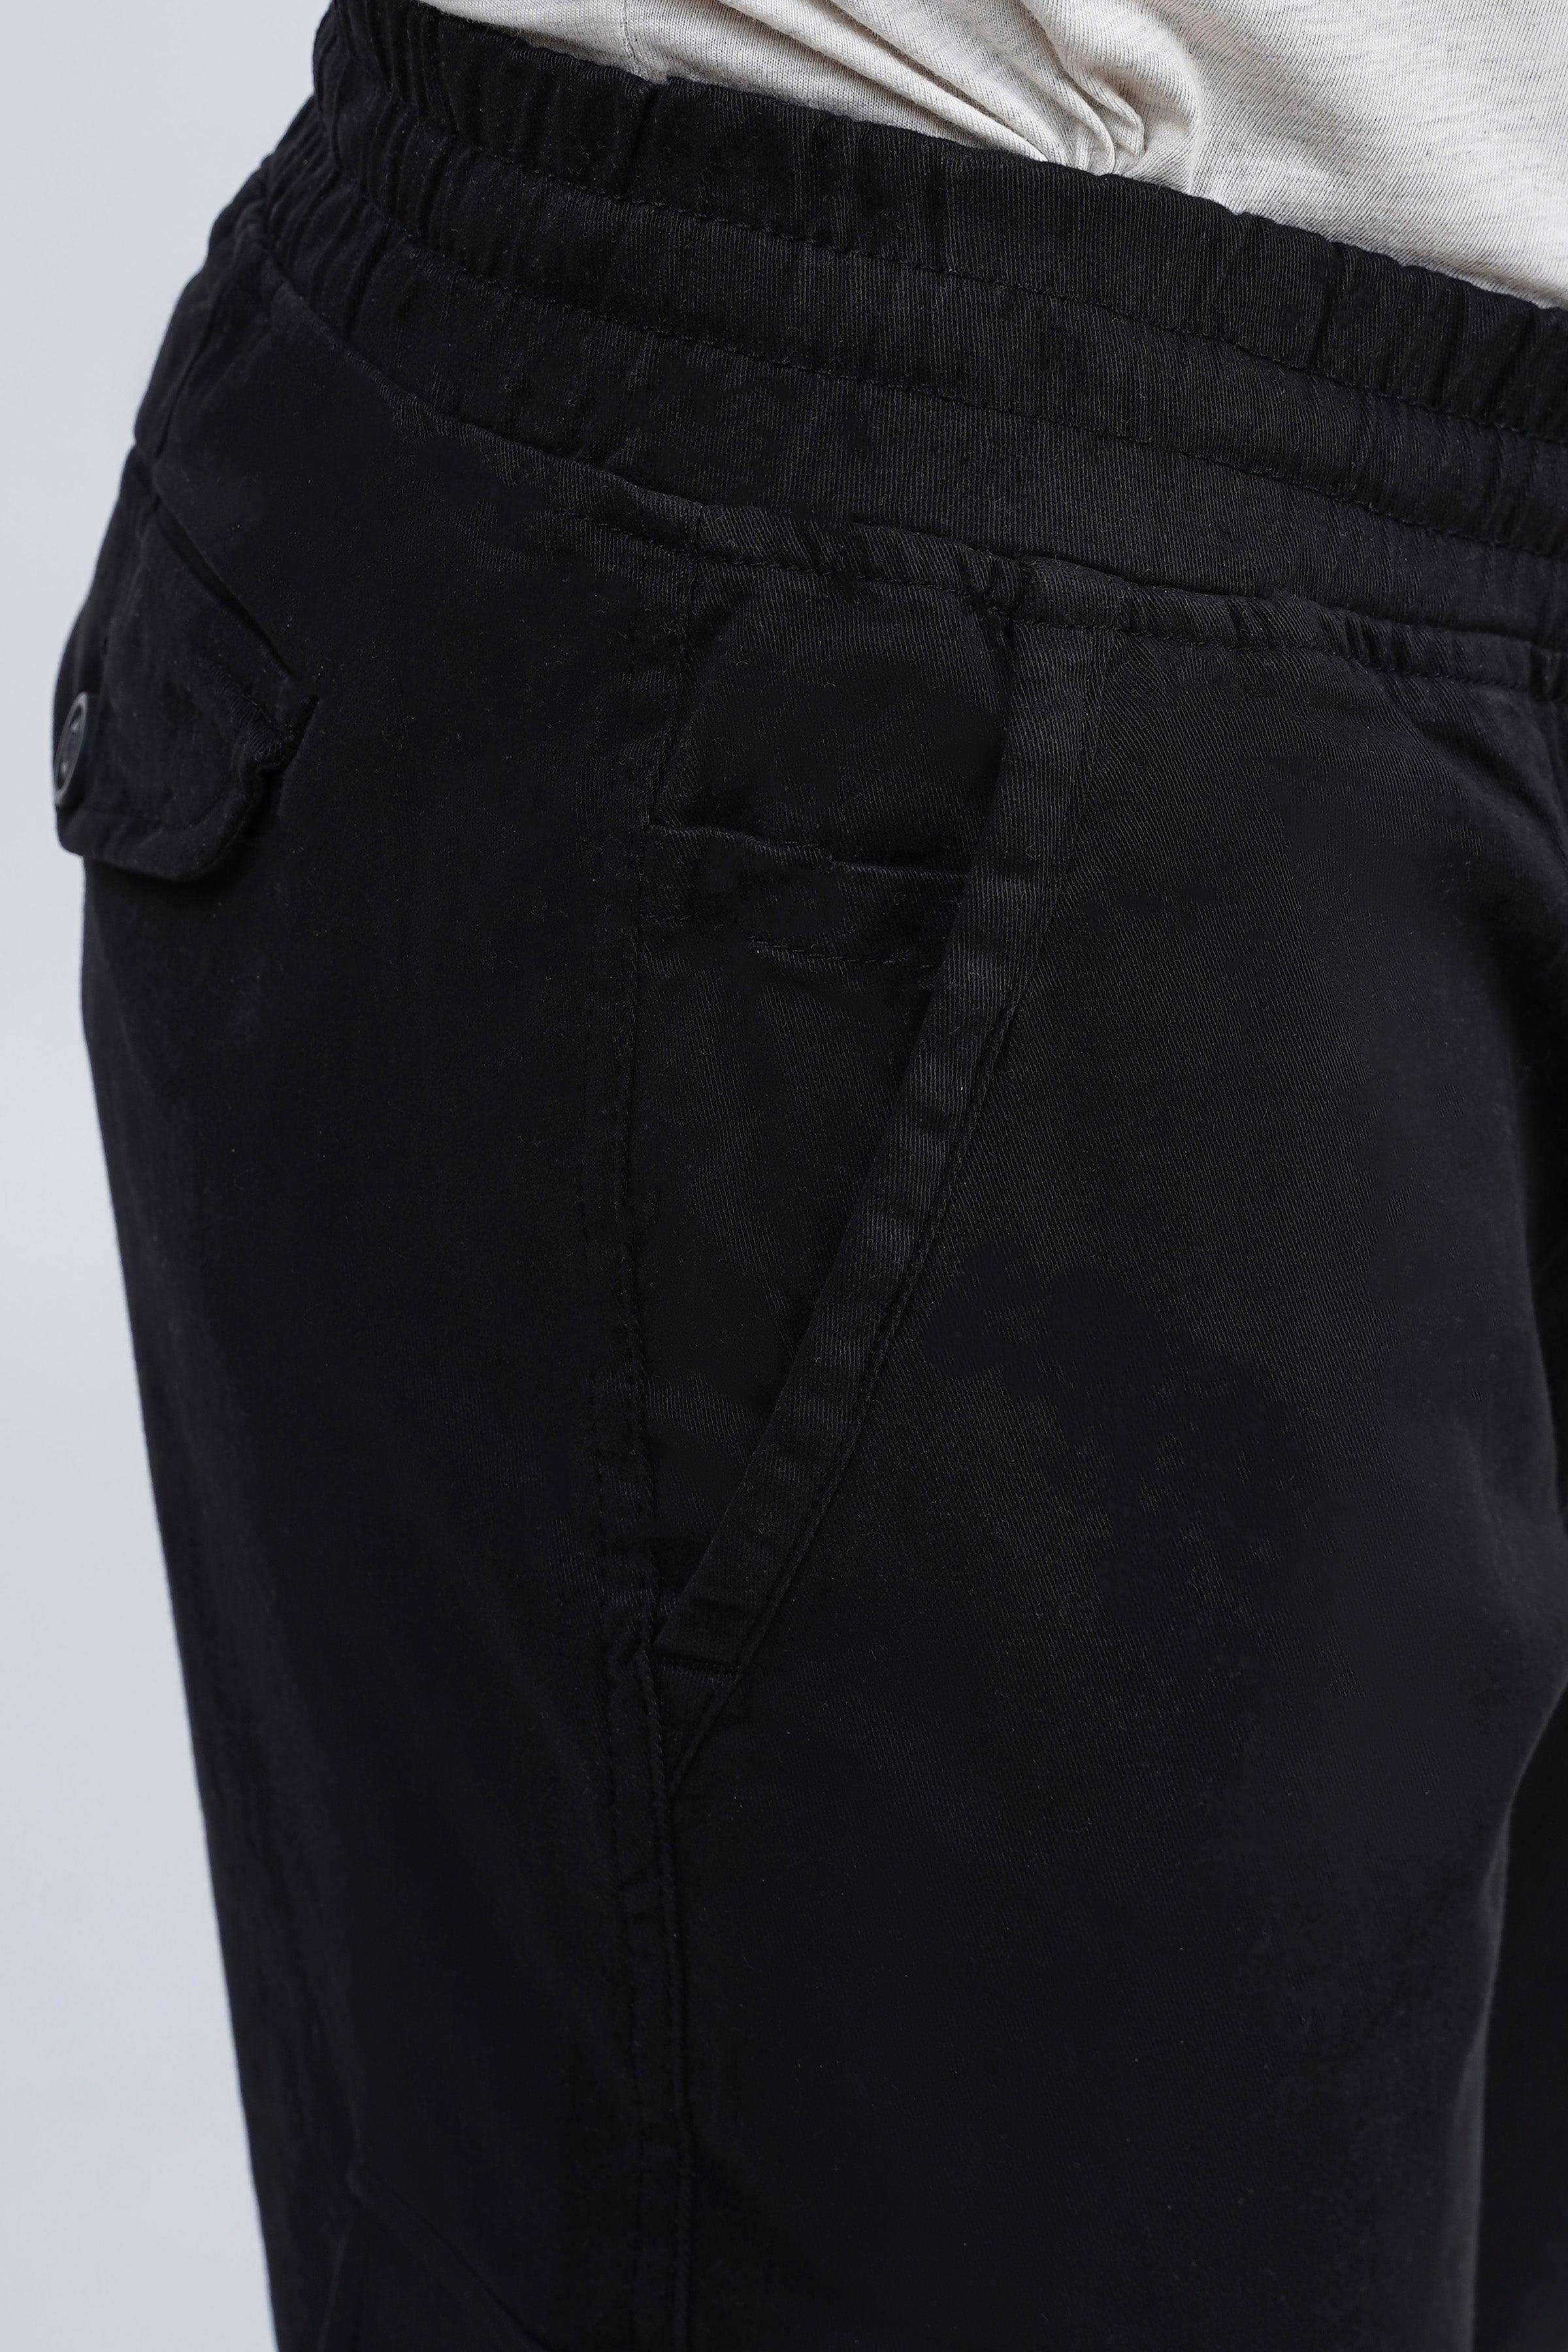 CARGO JOGGER TROUSER BLACK at Charcoal Clothing